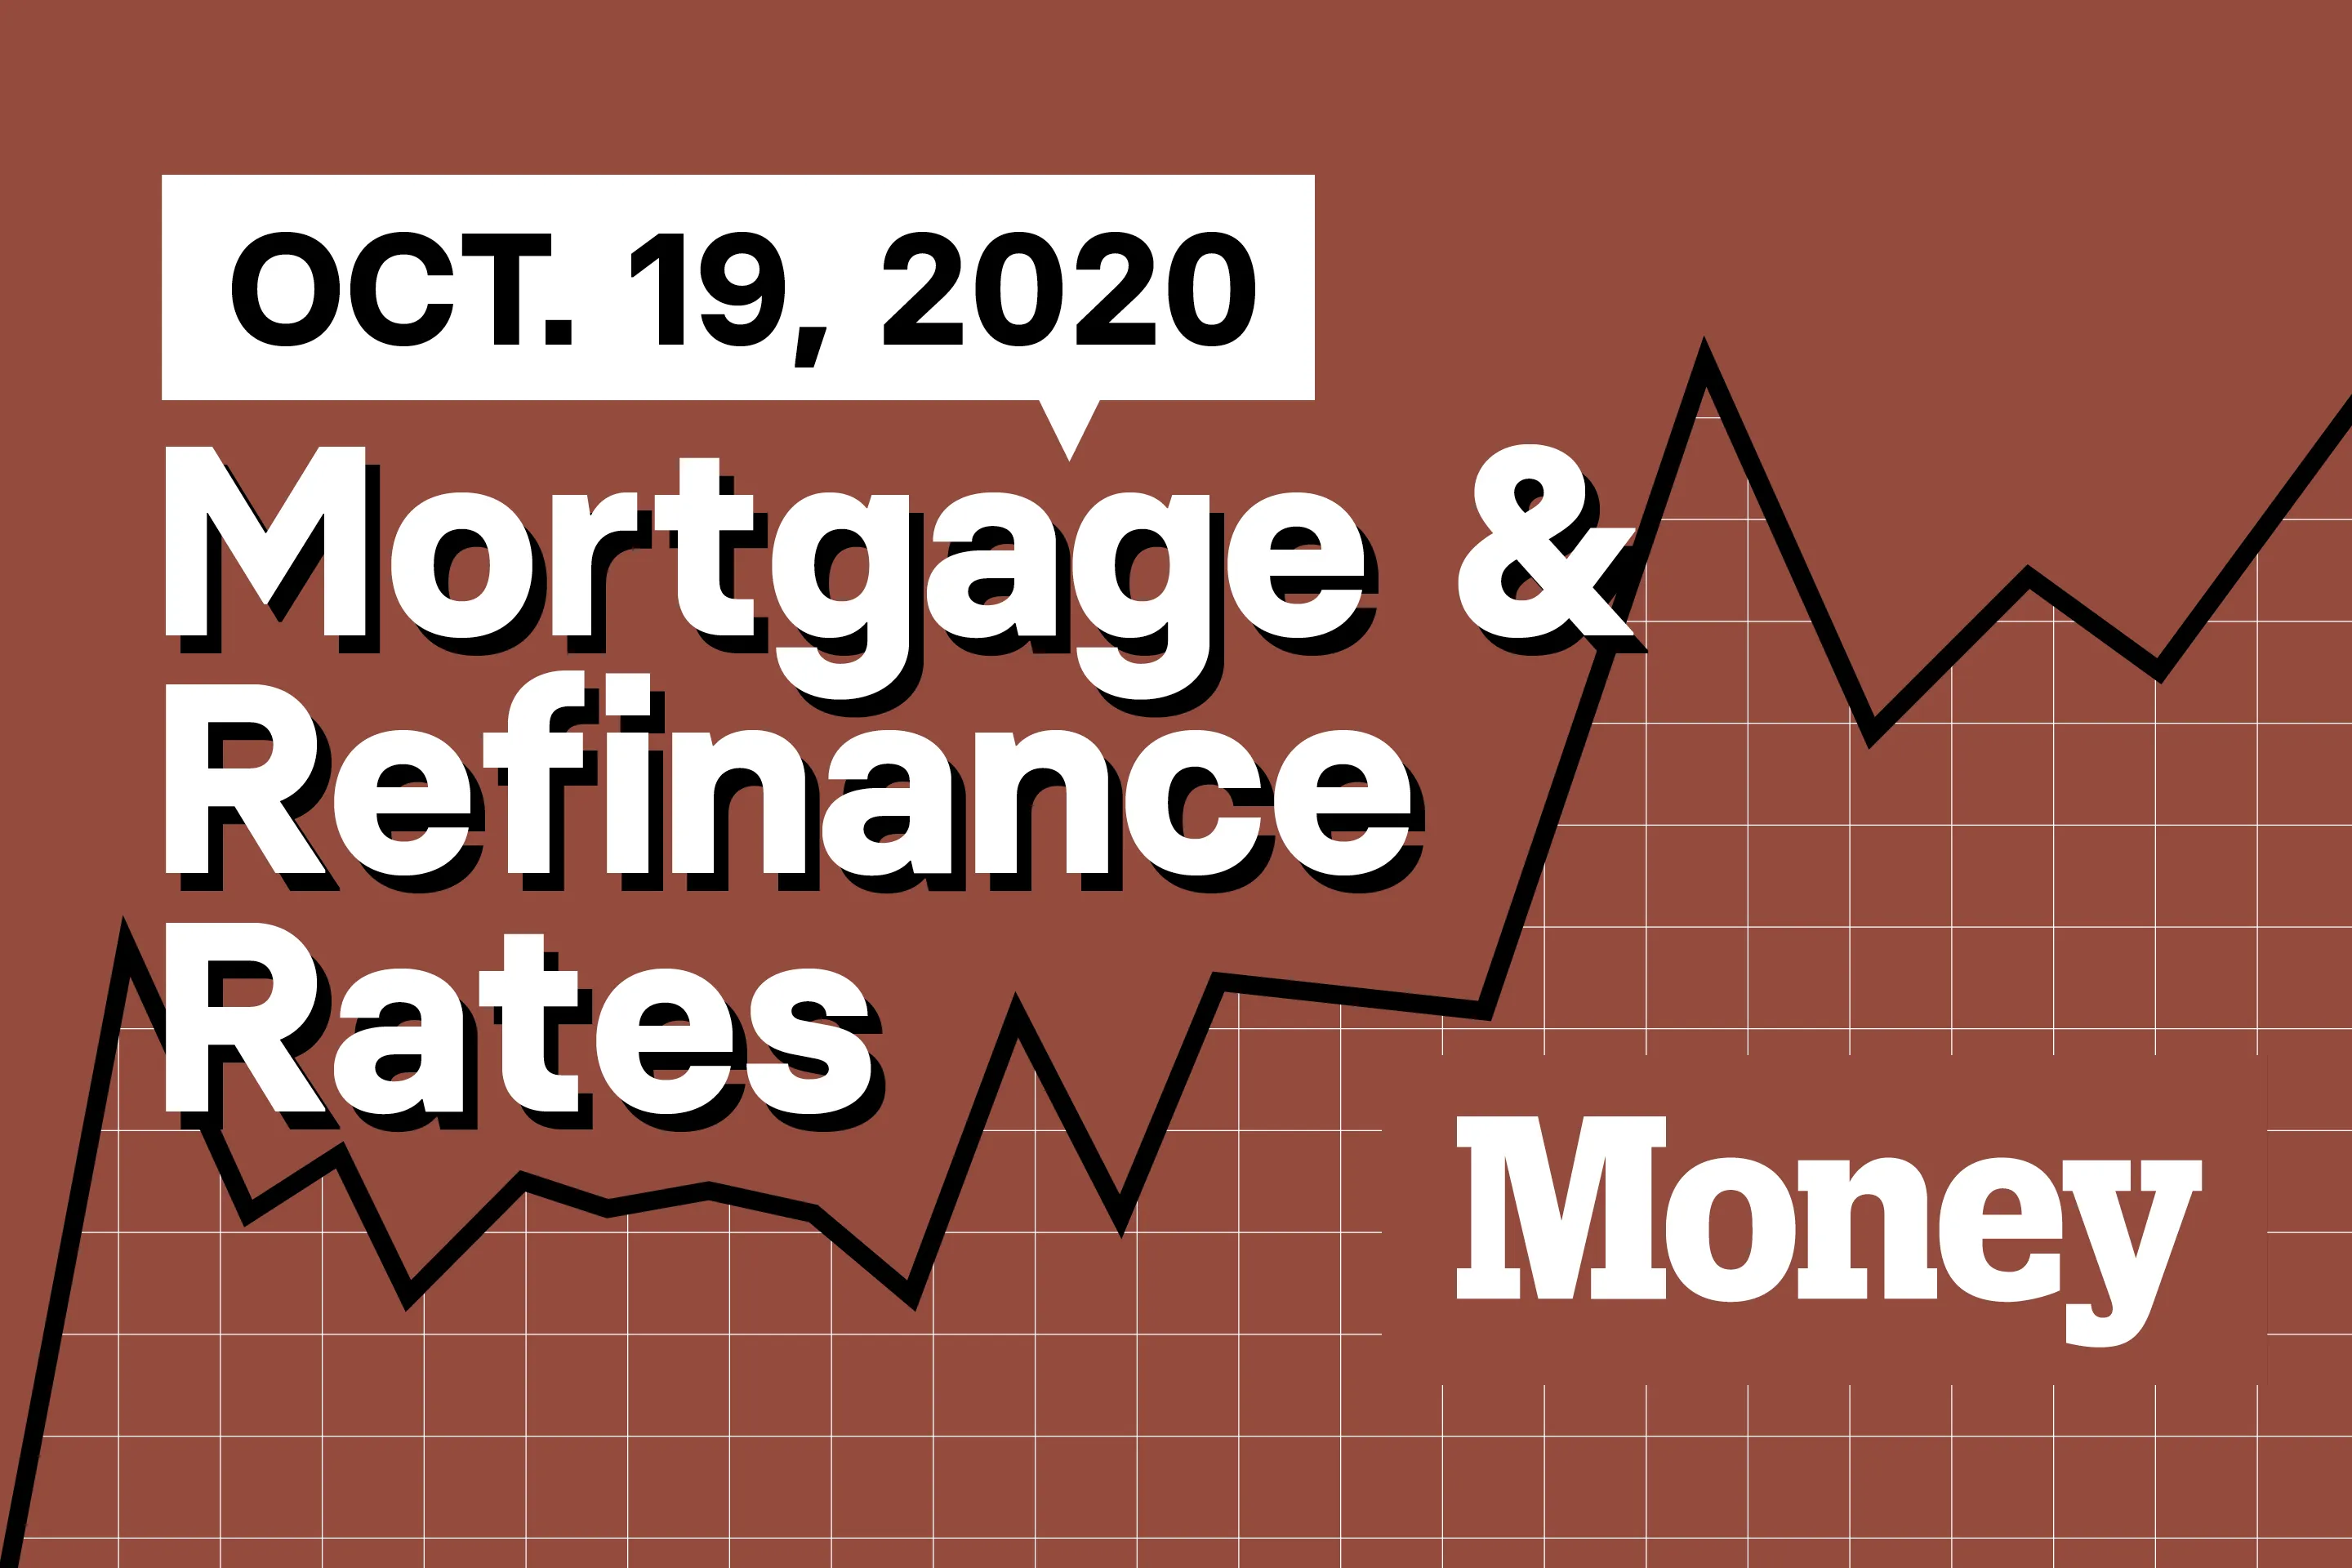 Here Are Today's Best Mortgage & Refinance Rates for October 19, 2020